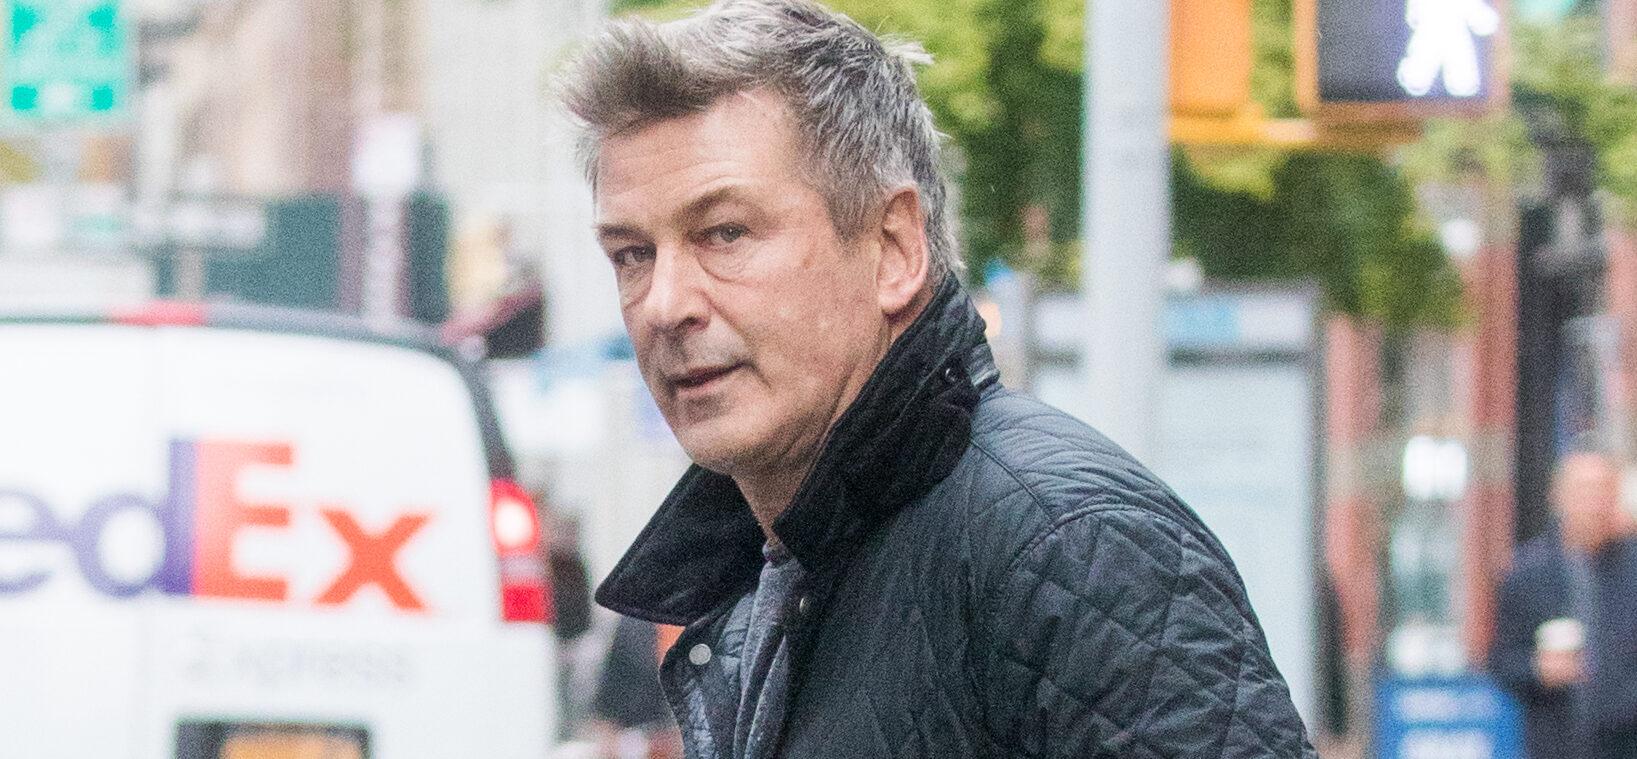 Alec Baldwin Breaks His Silence On How To Make Movie Sets Safer